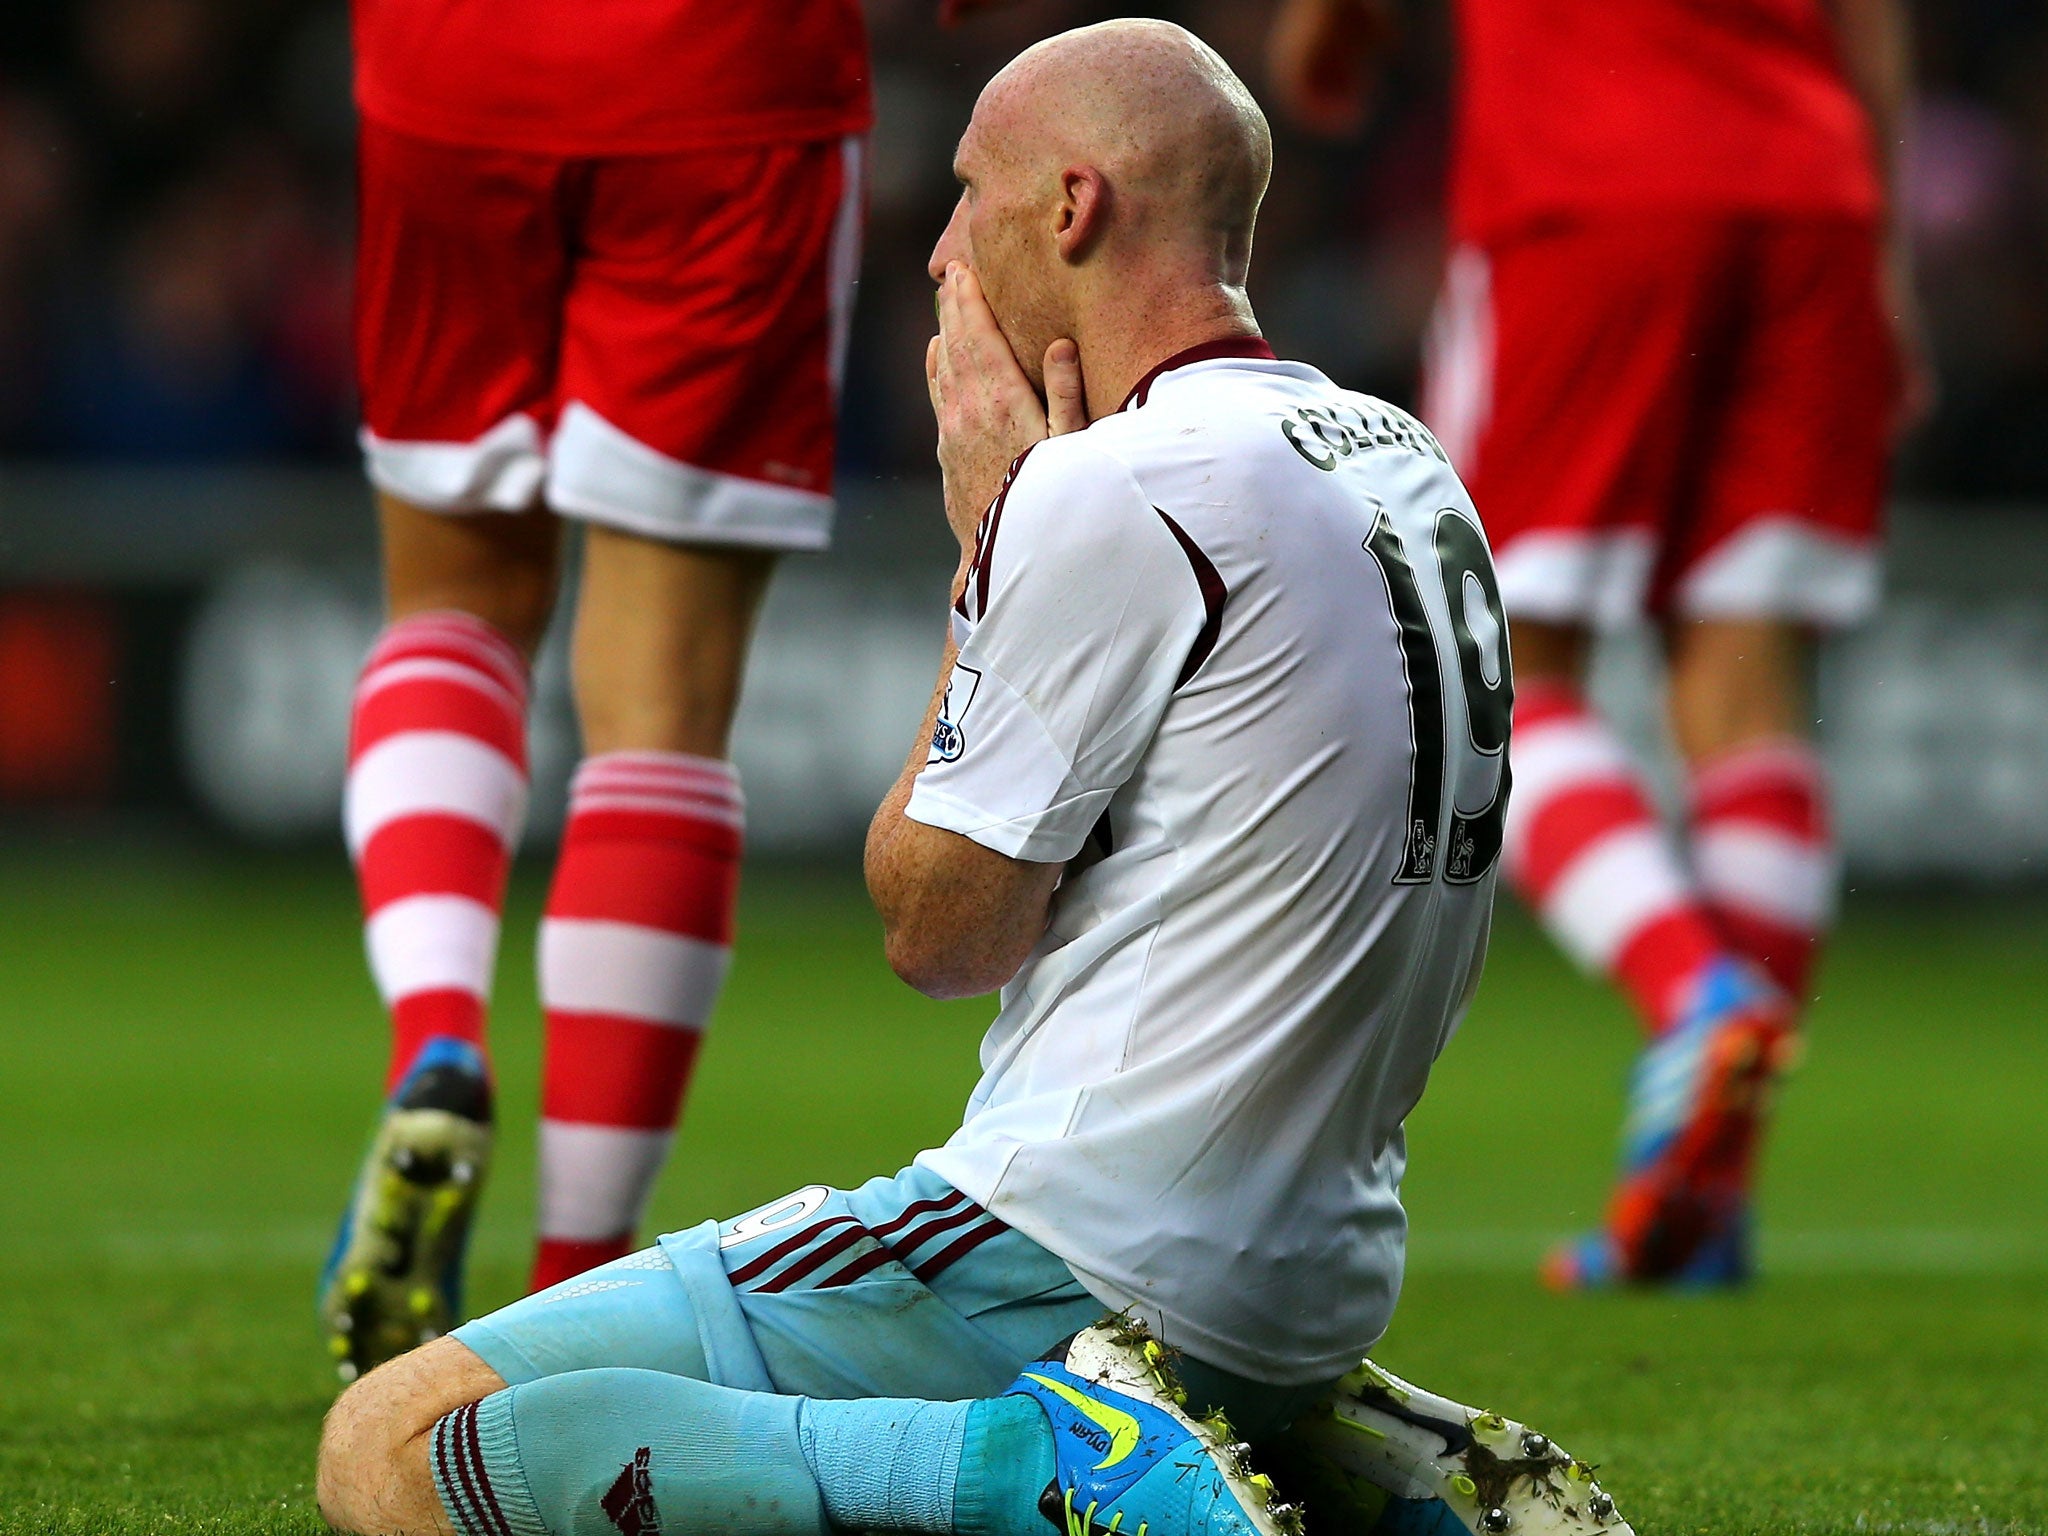 West Ham's James Collins reacts after his missed shot on goal